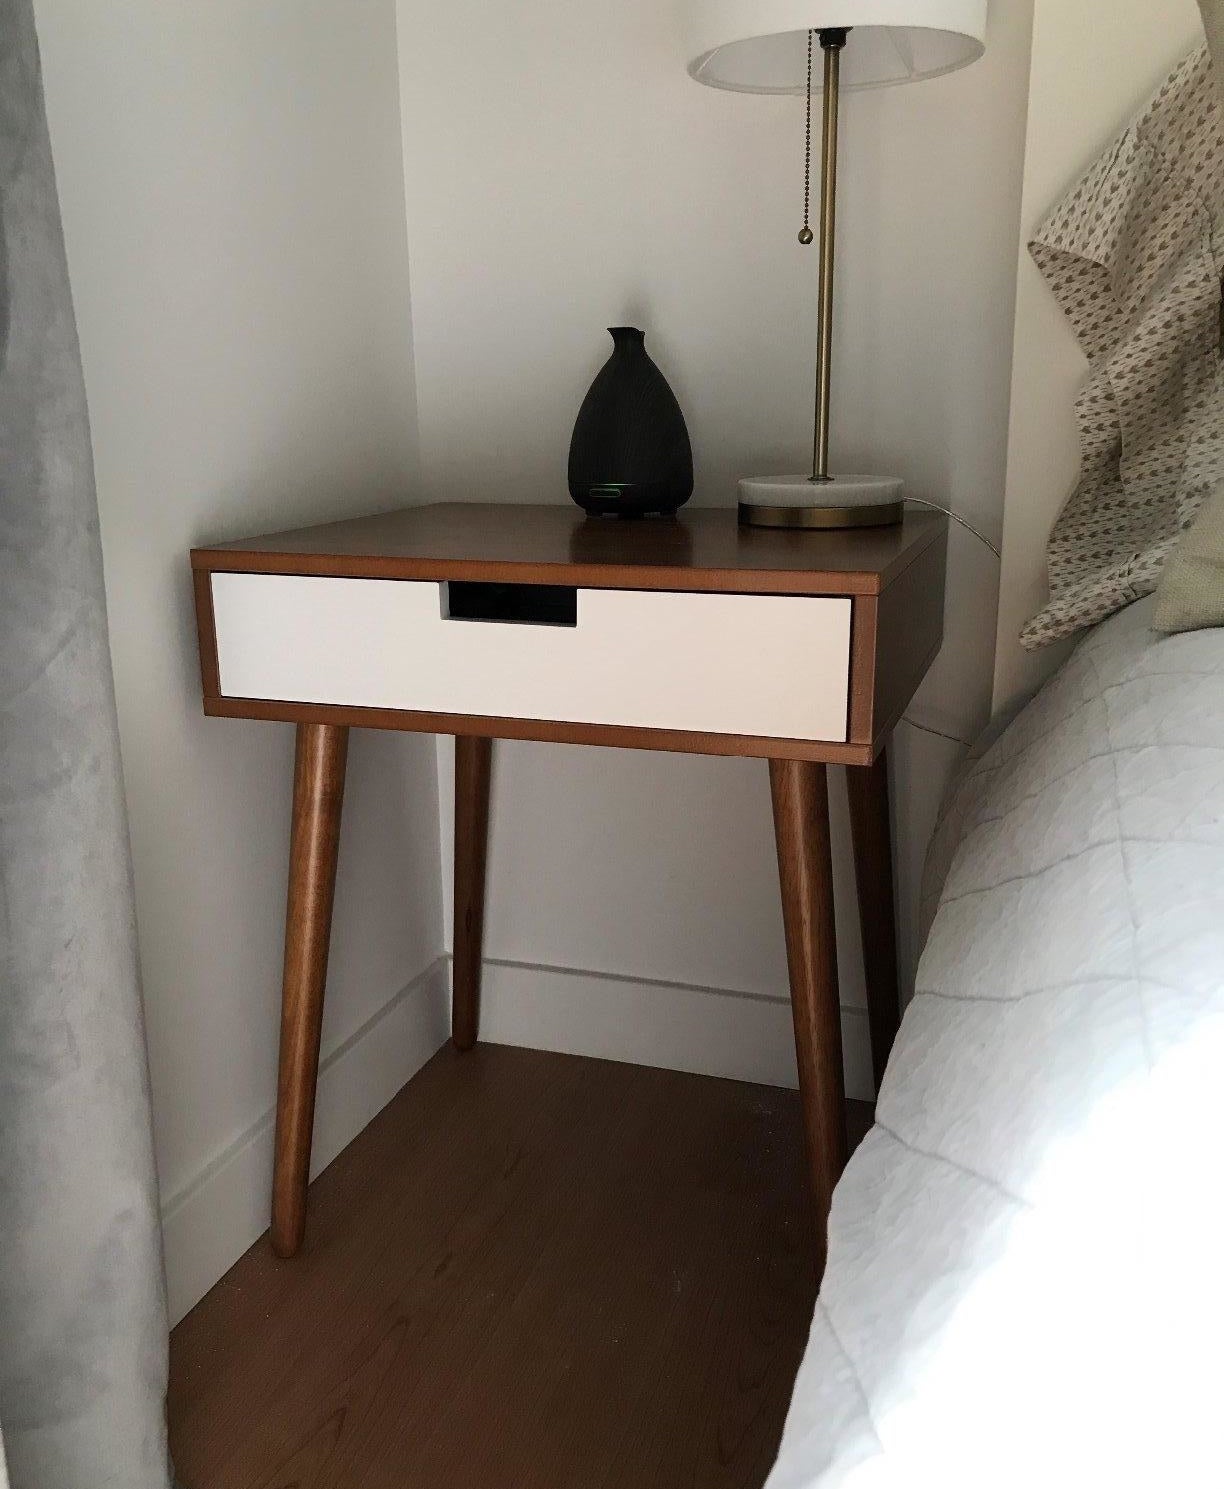 The brown and white nightstand